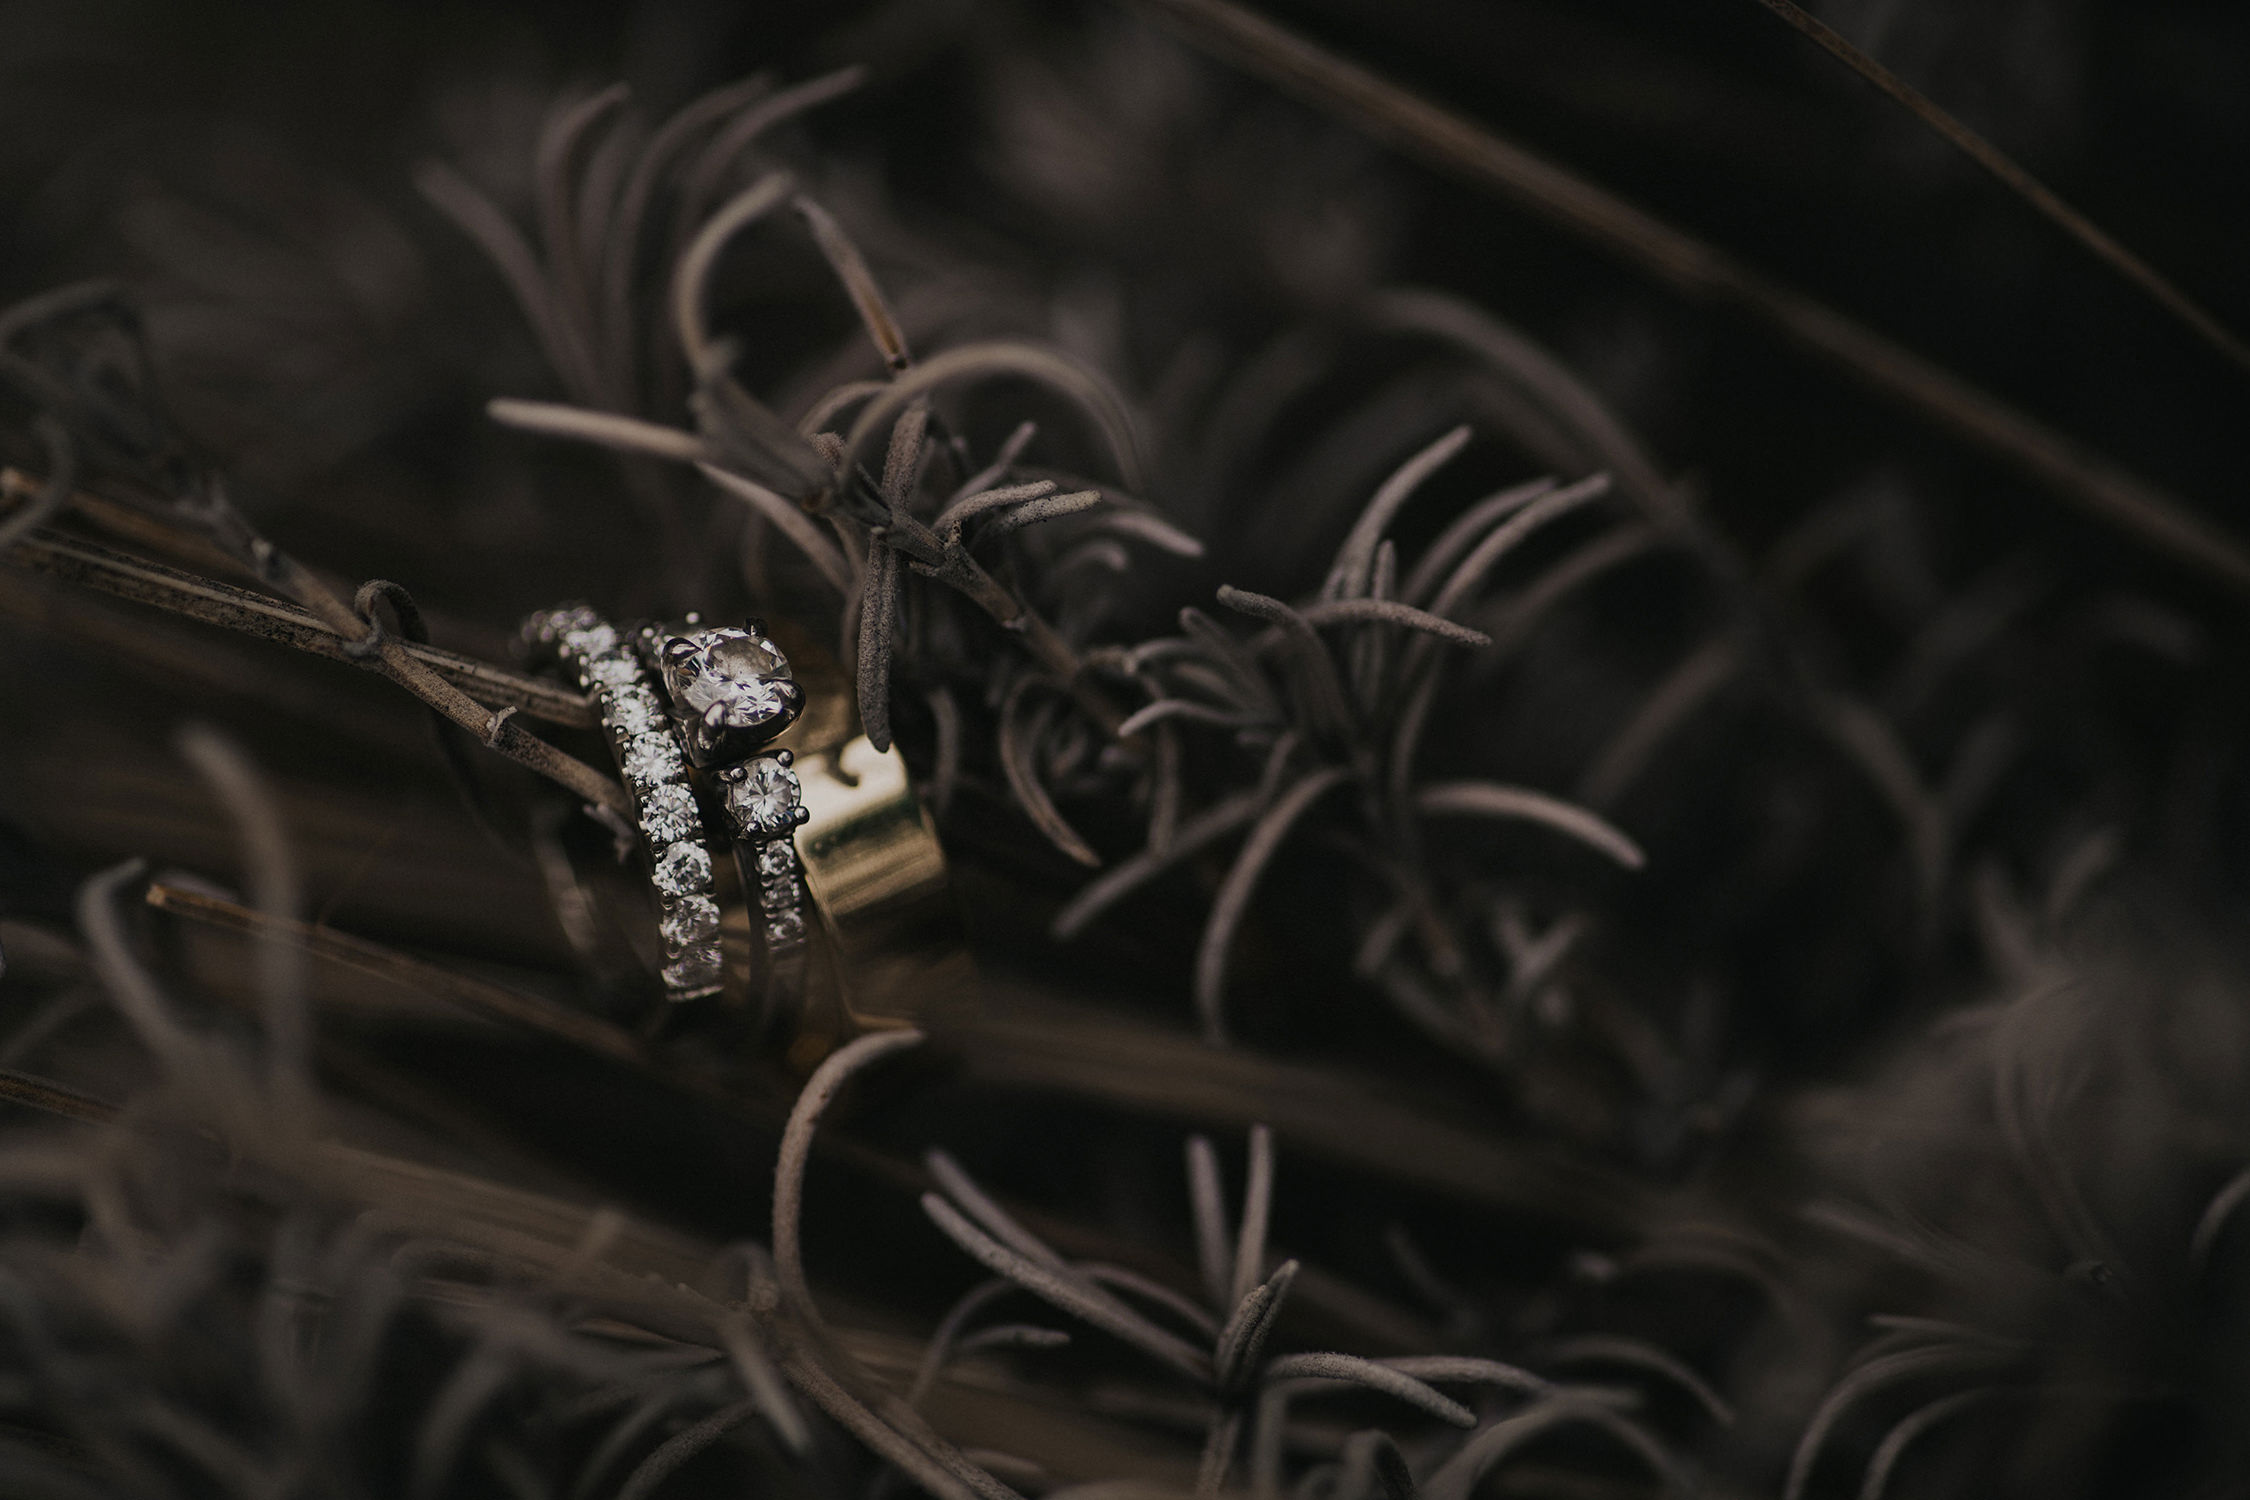 Wedding Rings captured at Fitzpatrick Winery